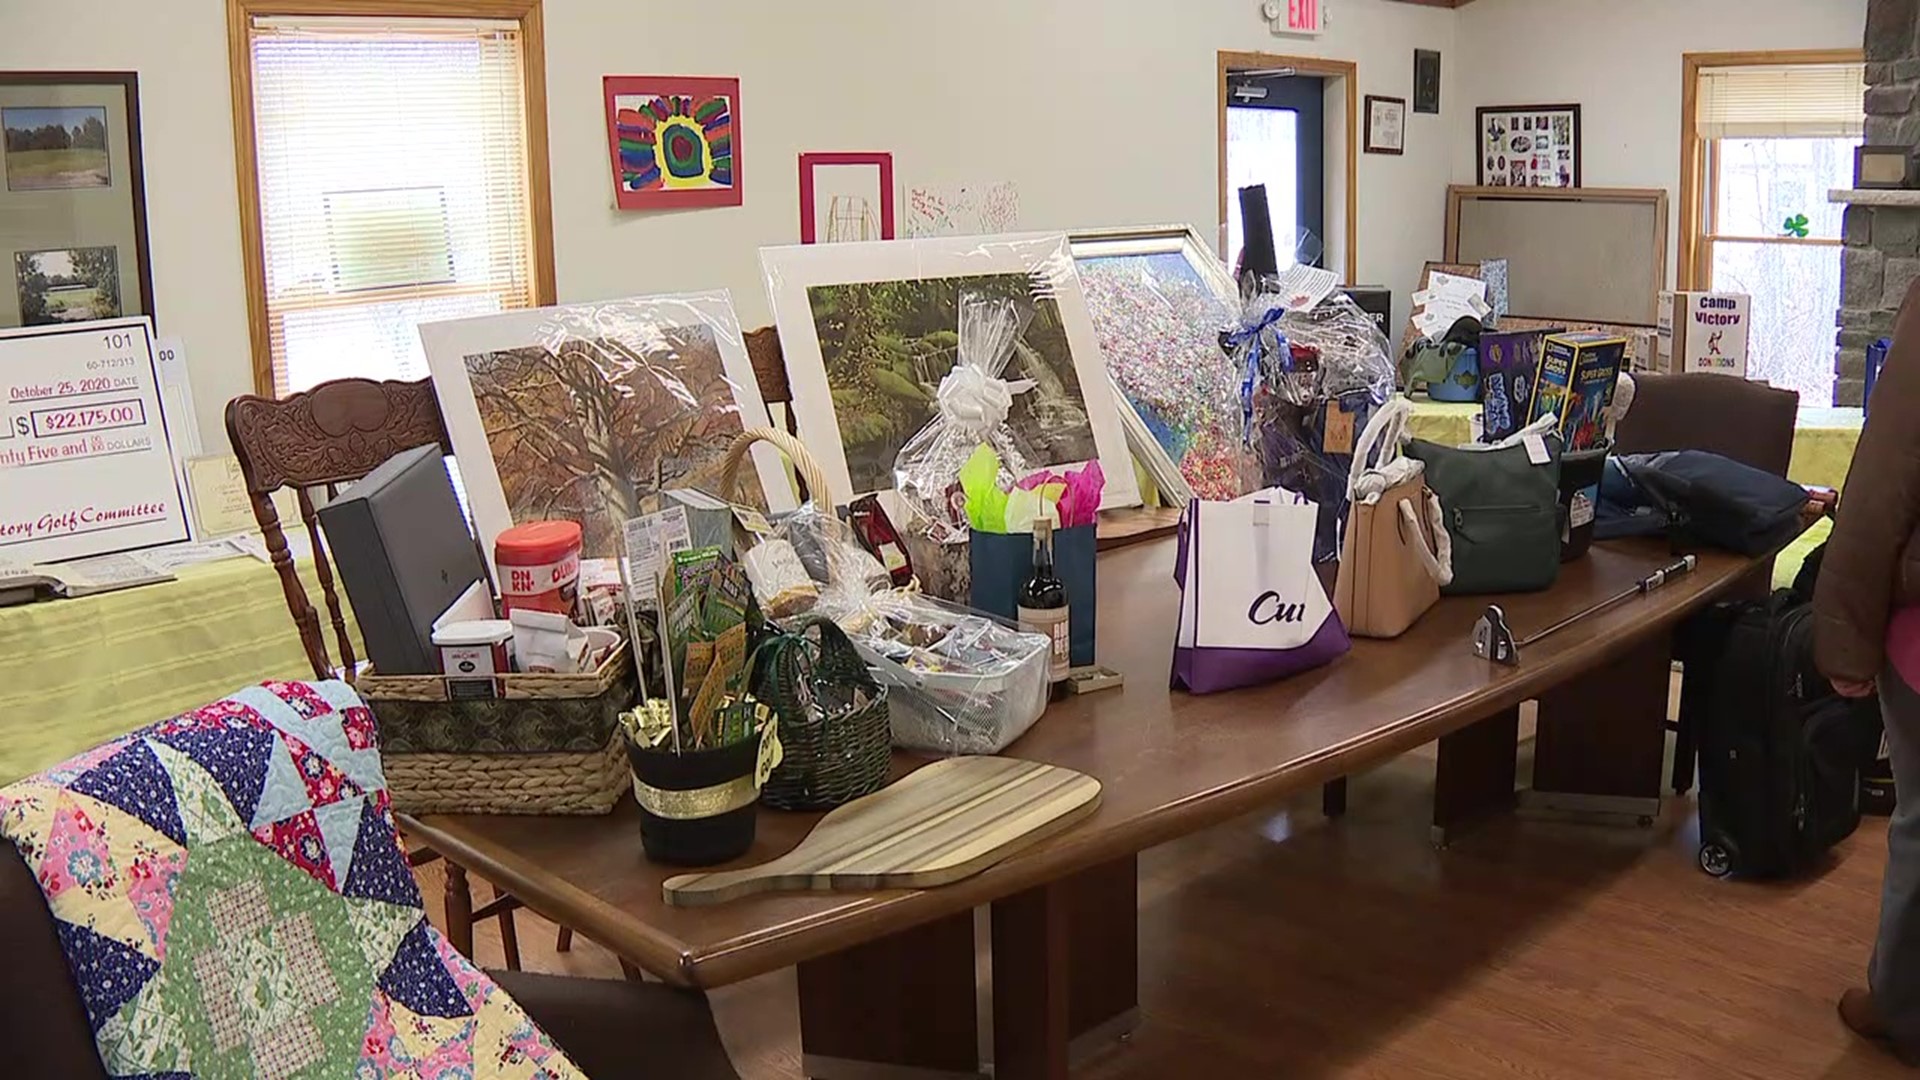 The facility in Columbia County is hosting an online auction to raise money for its programs. Newswatch 16's Nikki Krize explains how you can help.